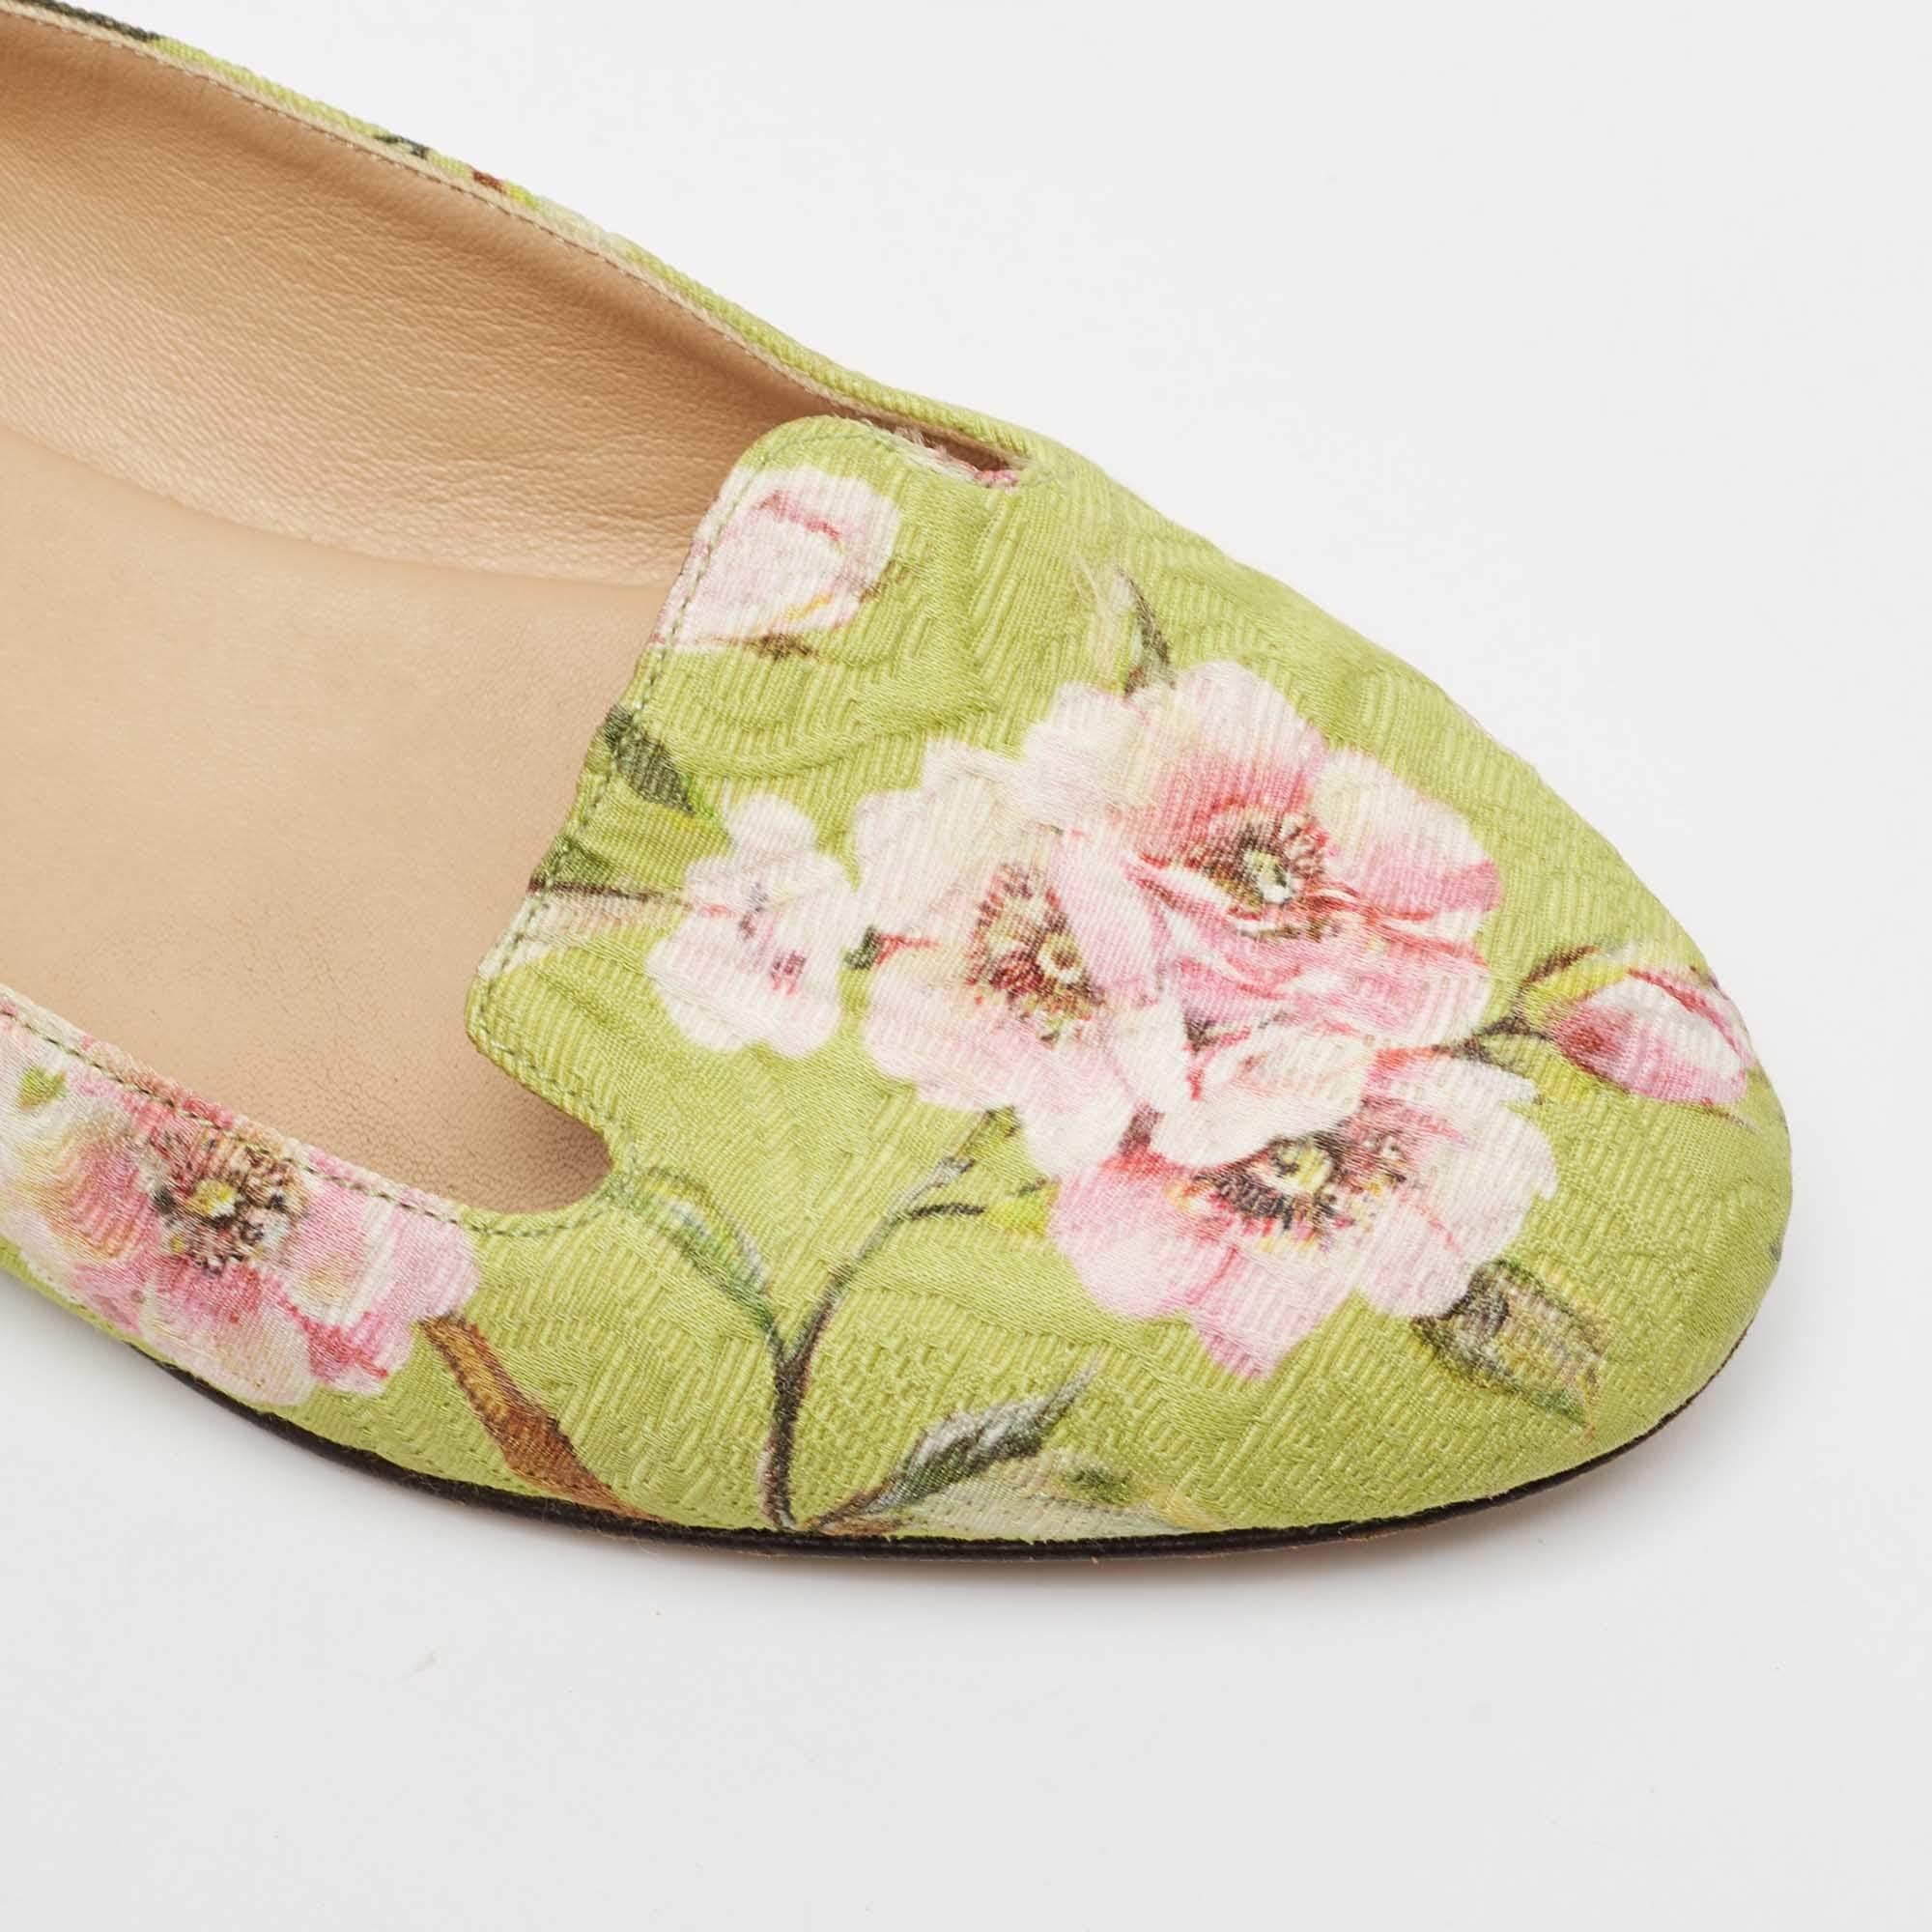 Dolce & Gabbana Multicolor Floral Print Brocade Flat Smoking Slippers Size 36 For Sale 1